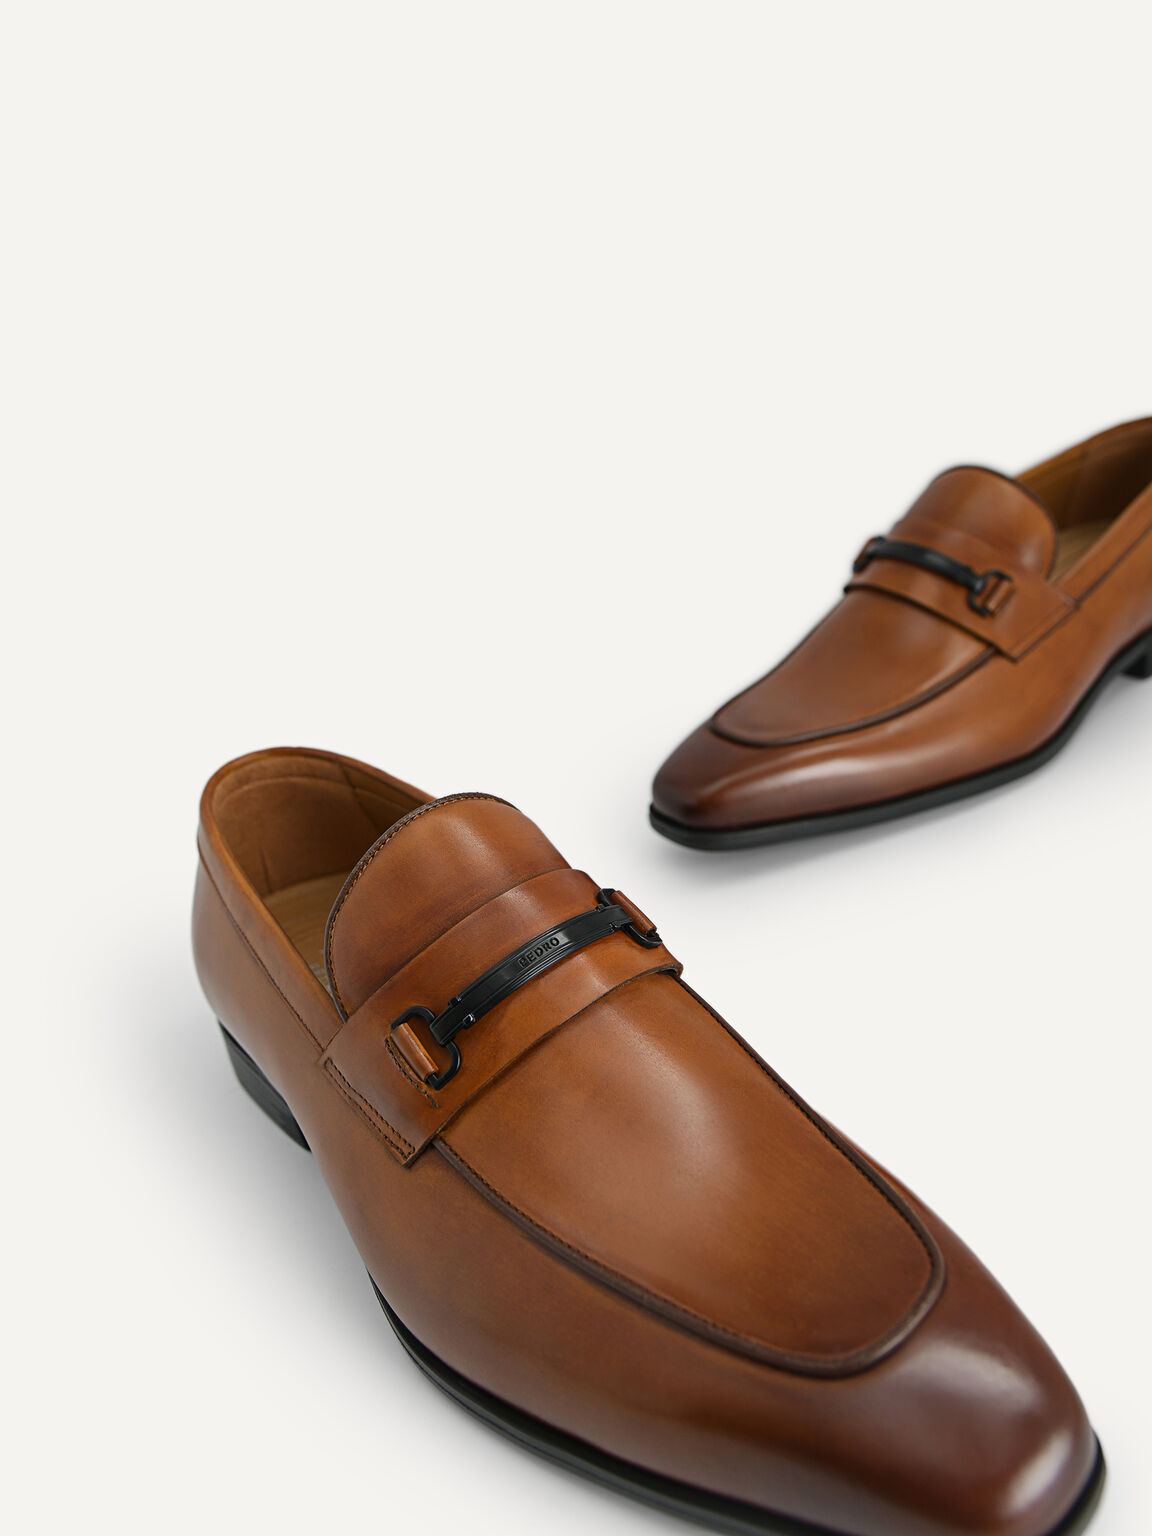 Altitude Leather Loafers, Camel, hi-res